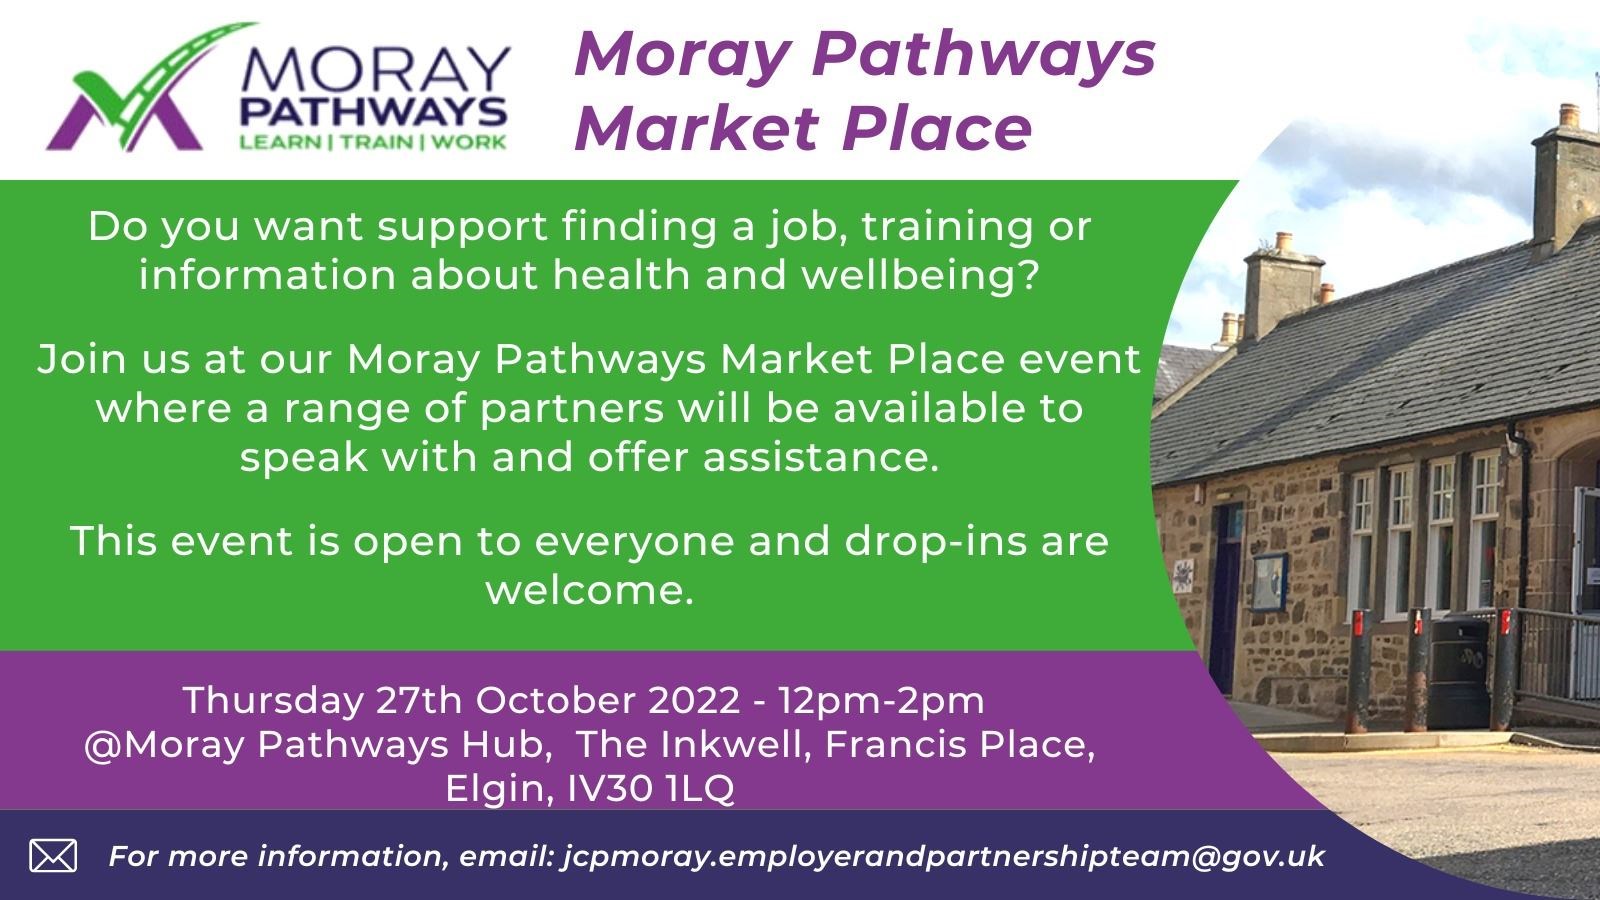 Support and advice to help get a job will be on hand at the Moray Pathways Marketplace.